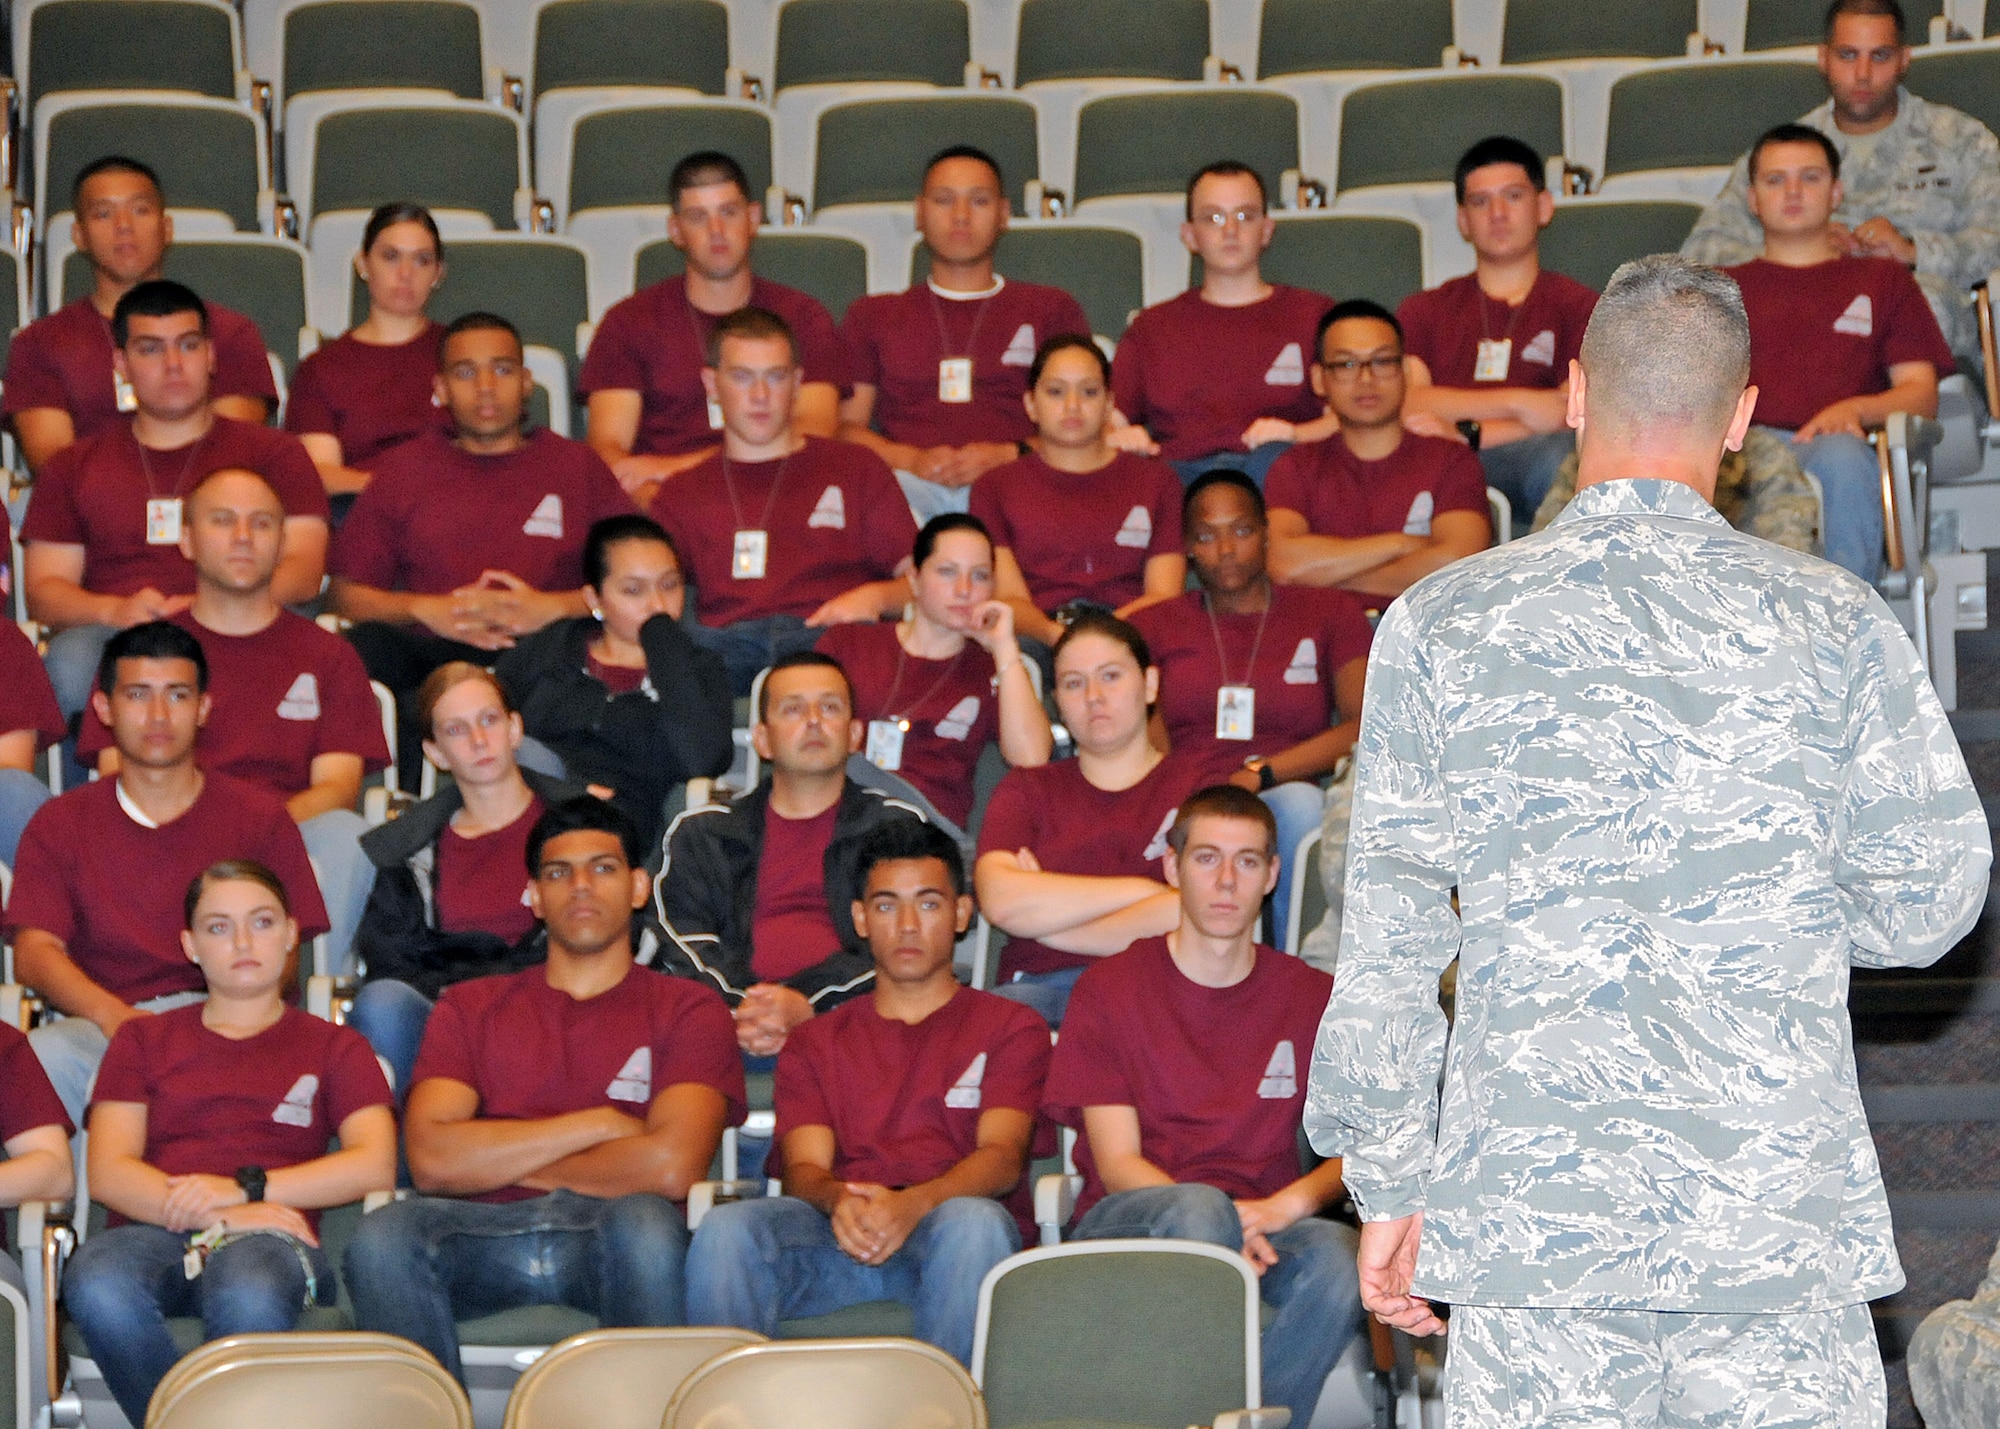 Colonel Arthur Floru, 143d Airlift Wing Commander, turns to address the members of the 143d AW Student Flight during the Rhode Island Air National Guard's annual Wingman Day on 3 August 2014. The event was held at the Knight Campus of the Community College of Rhode Island in Warwick, RI. National Guard Photo by Technical Sgt Jason Long (RELEASED)